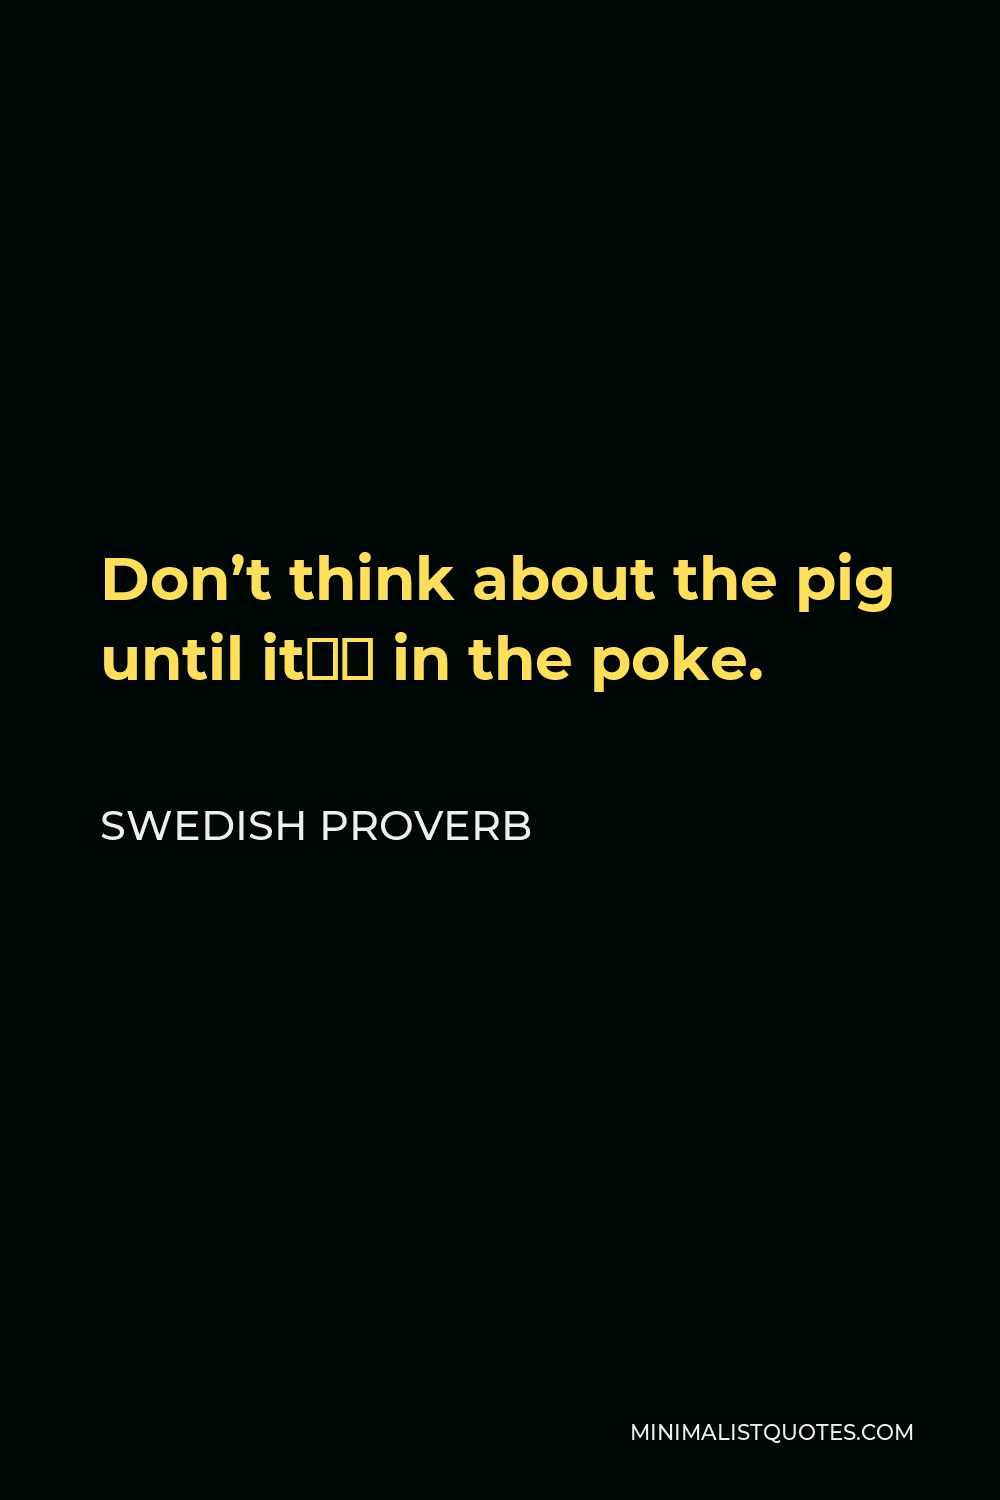 Swedish Proverb Quote - Don’t think about the pig until it’s in the poke.